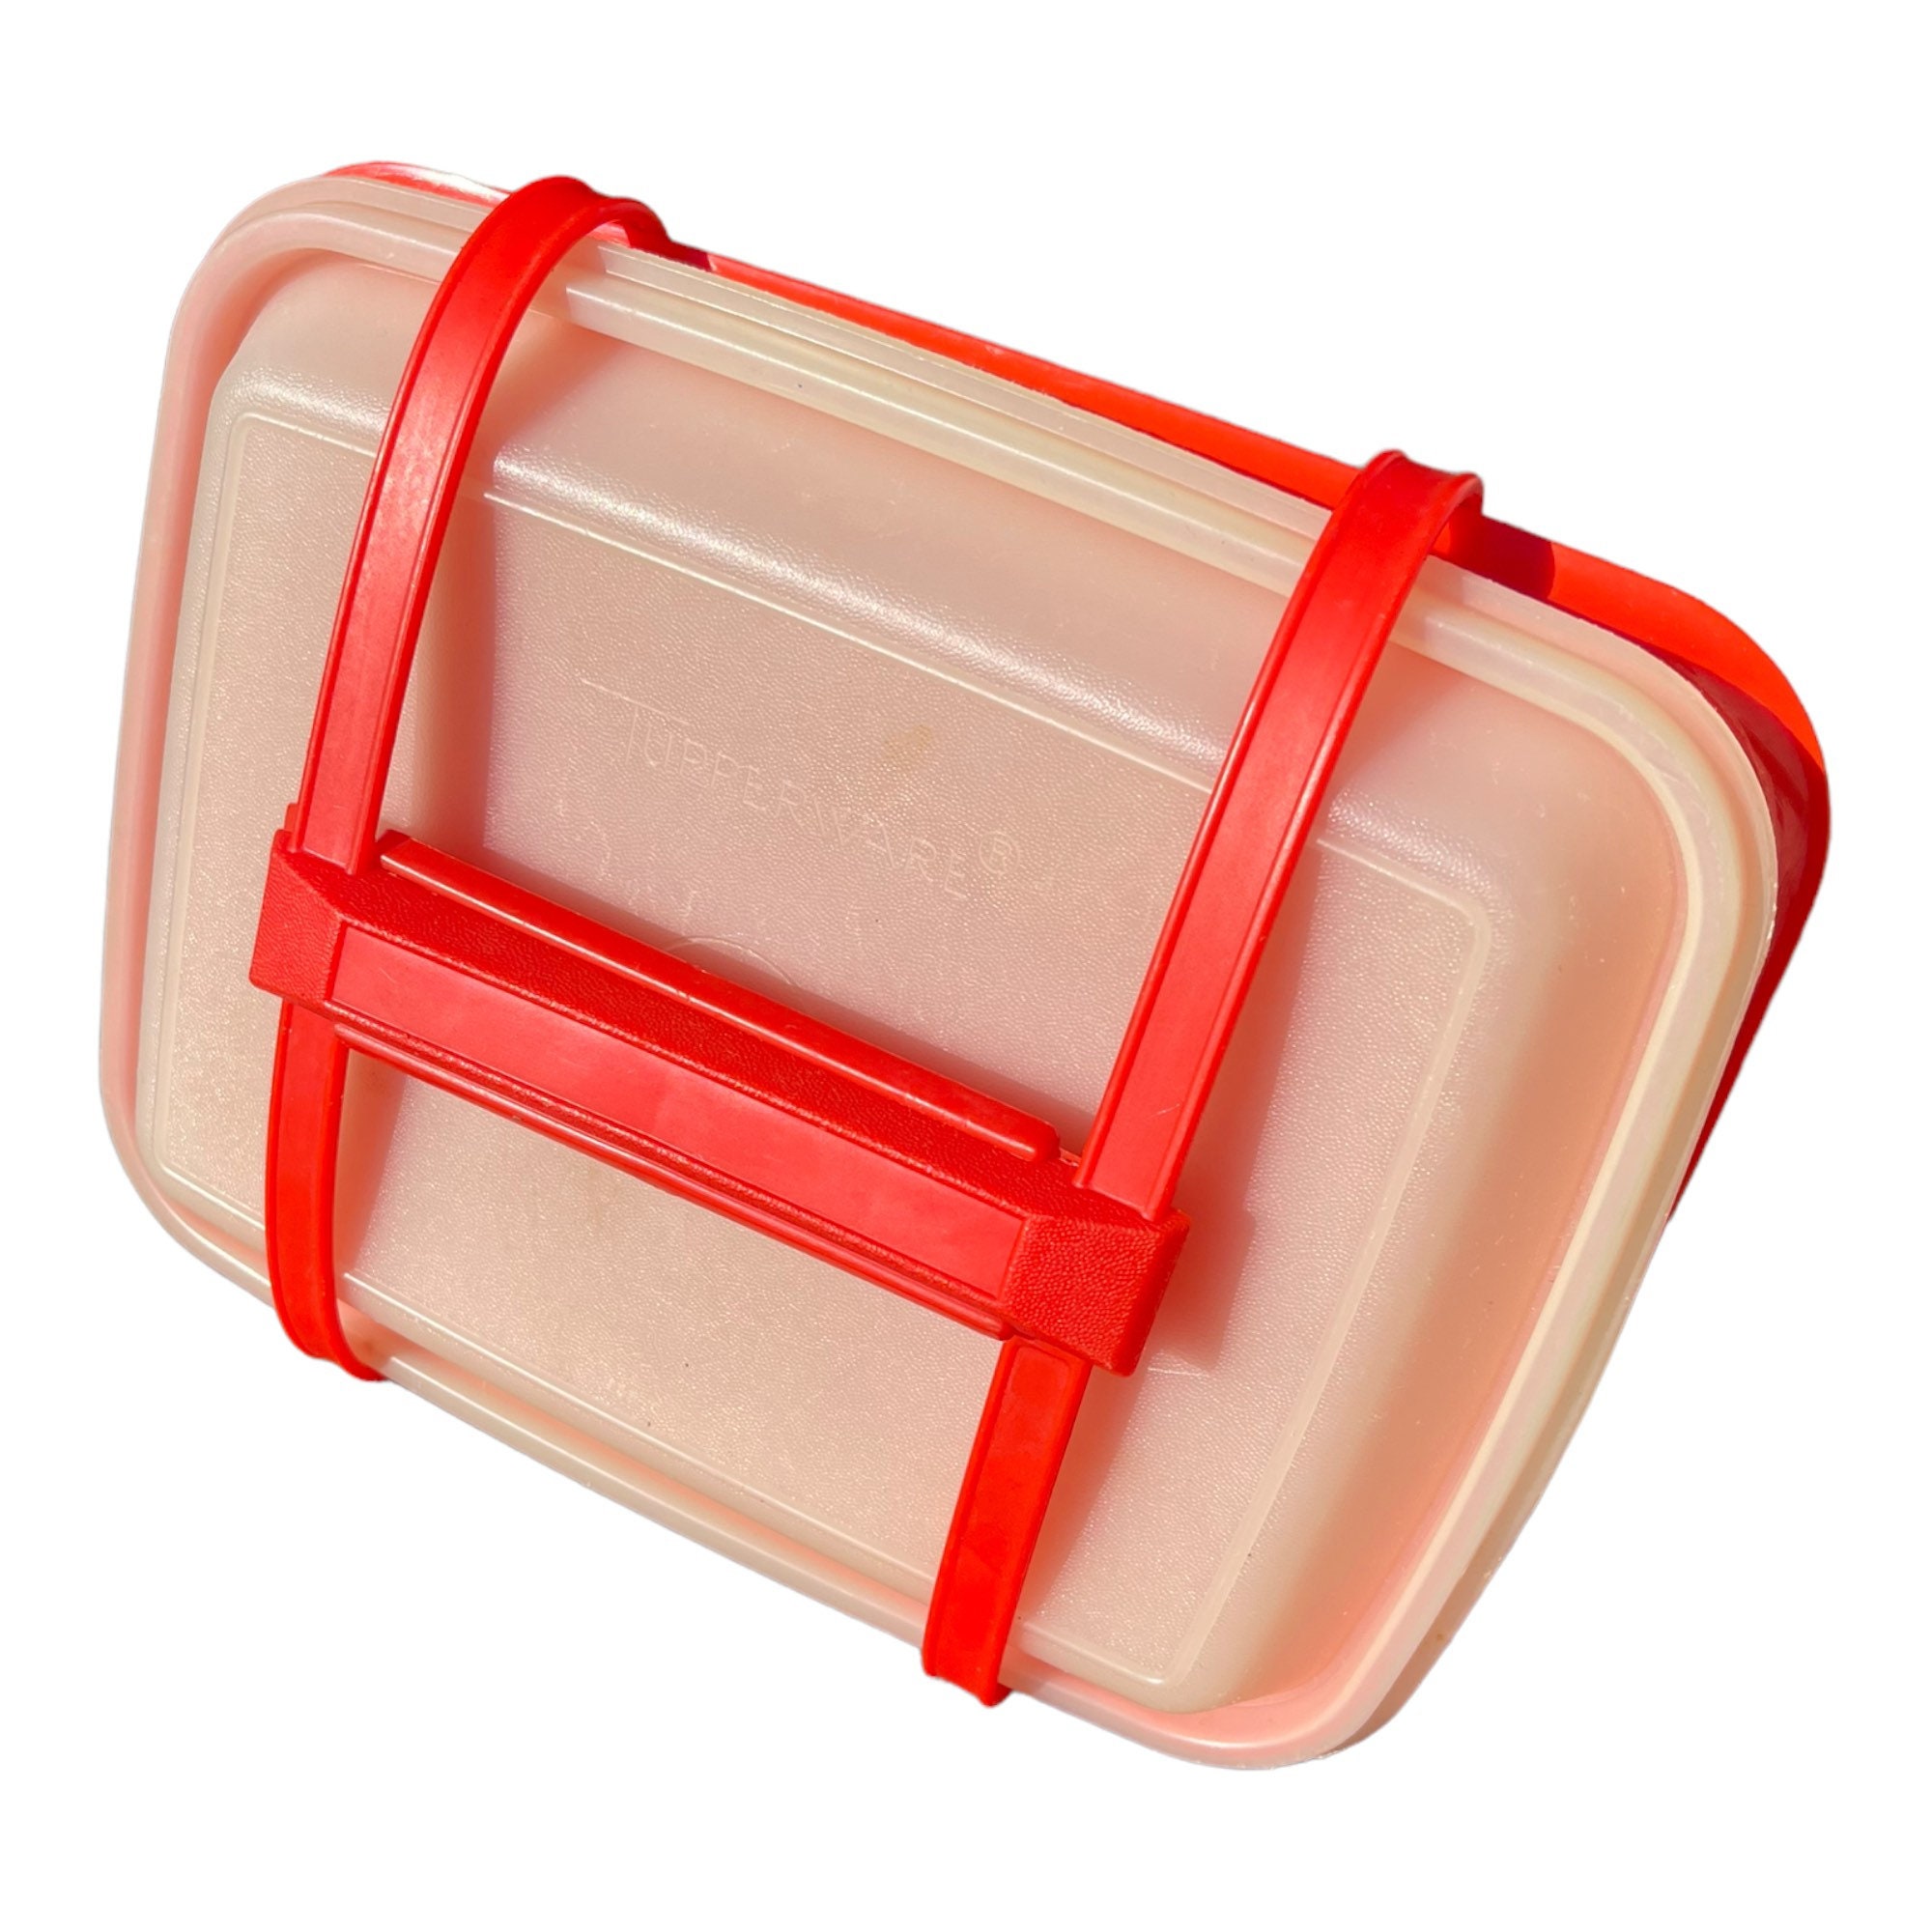 Vintage Tupperware Lunch Box Pak N Carry Orange Plastic Food Storage  Container With Lid Tupperware Travel Lunch Box -  Denmark